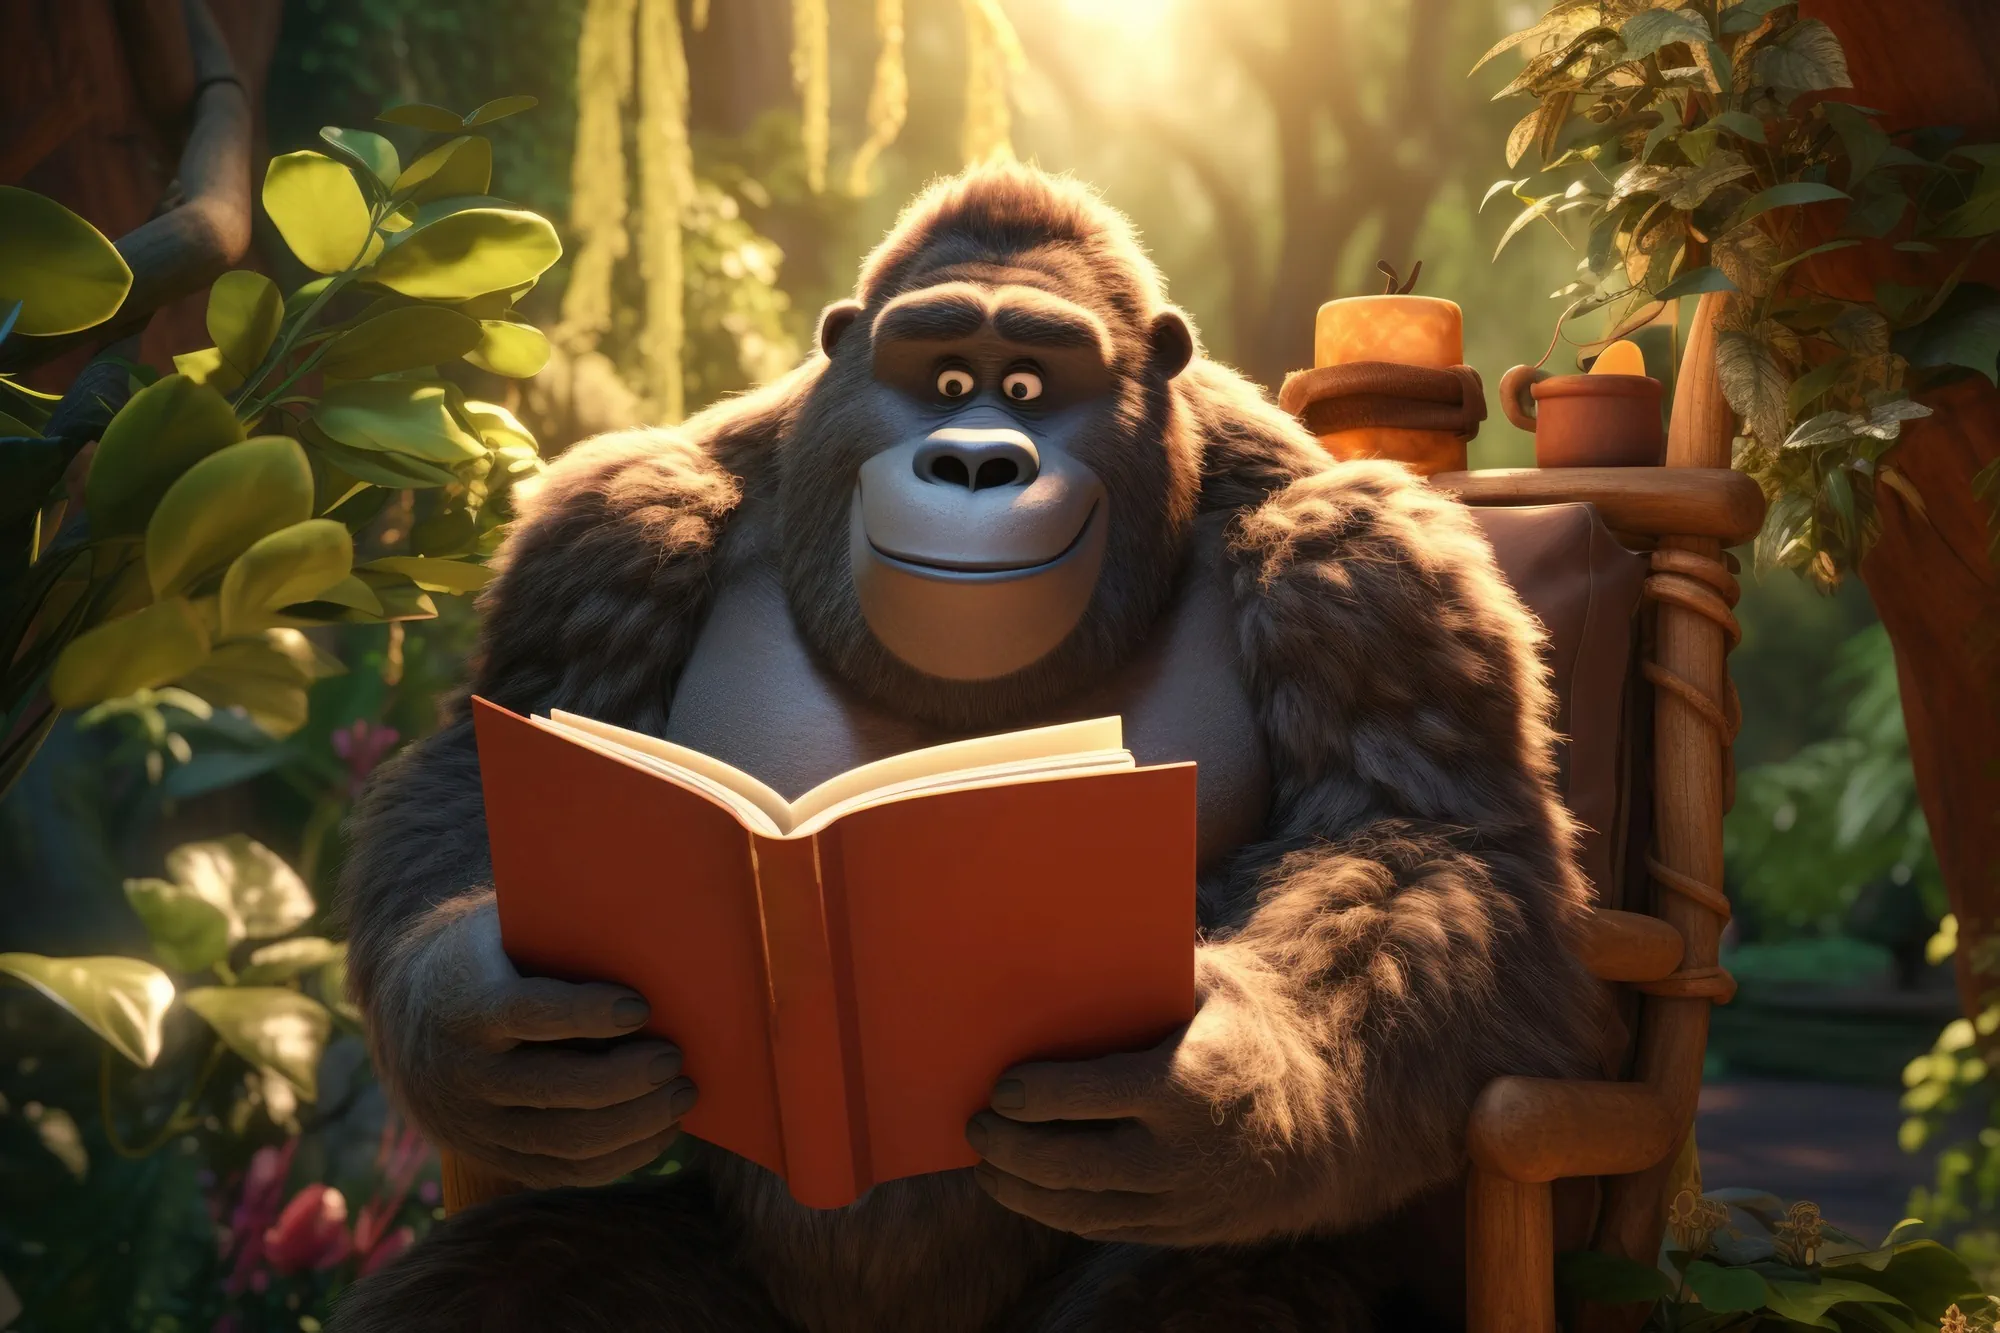 A friendly gorilla, with a gentle expression, sits in a lush jungle setting, absorbed in reading a book. Sunlight filters through the foliage, and the scene feels so inviting you almost expect to make contact with this serene moment.